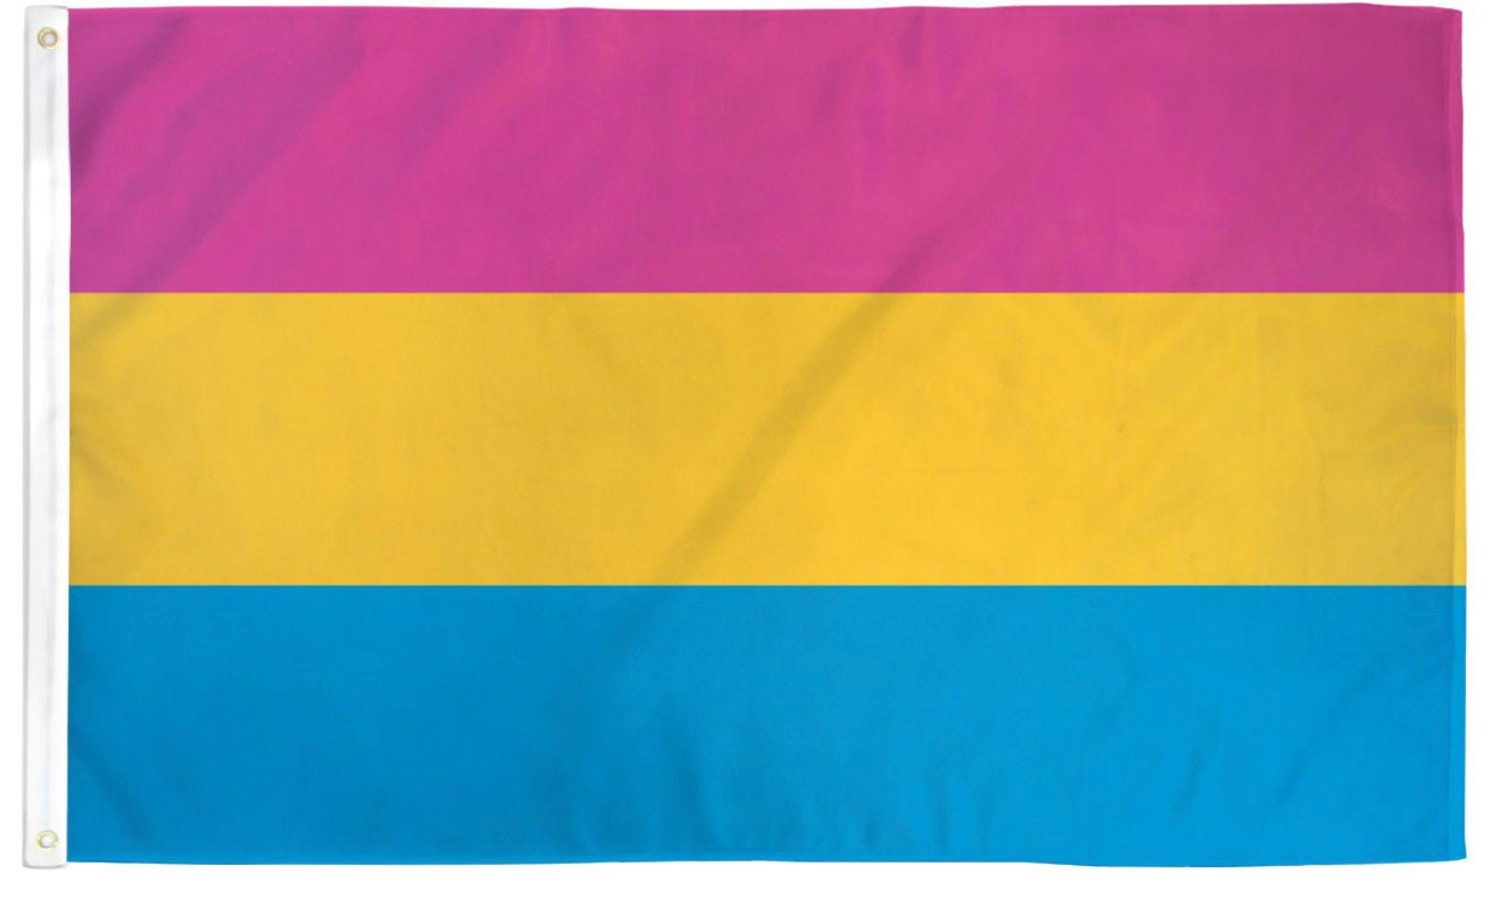 SALE! 5ft x 3ft Pansexual Pride Flag 